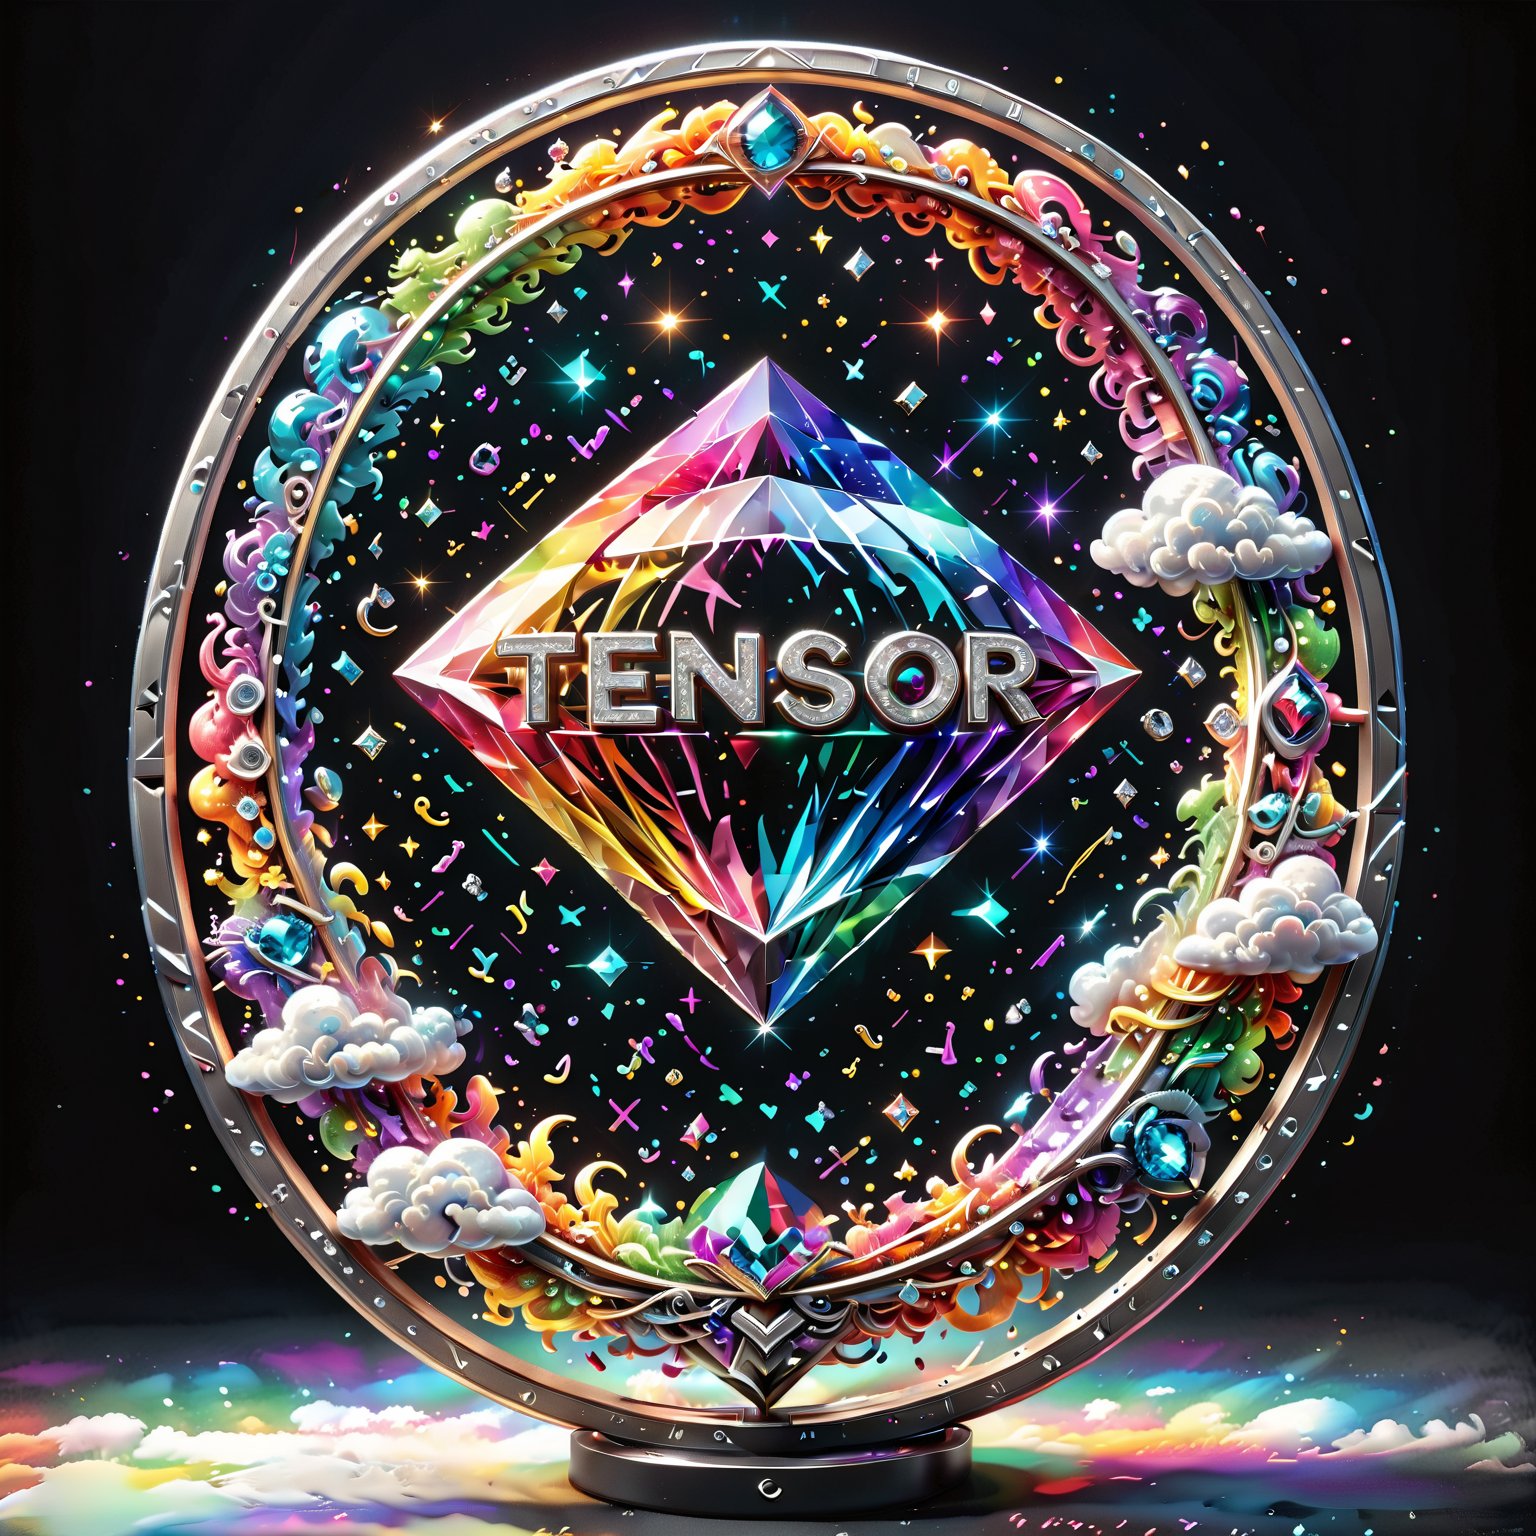 a ultra-detailed intricate round award, diamond and platinum outlines (((text in cursive with only the letters "TENSOR ART"))) rainbow, clouds, diamonds, gems, music notes, inspiration